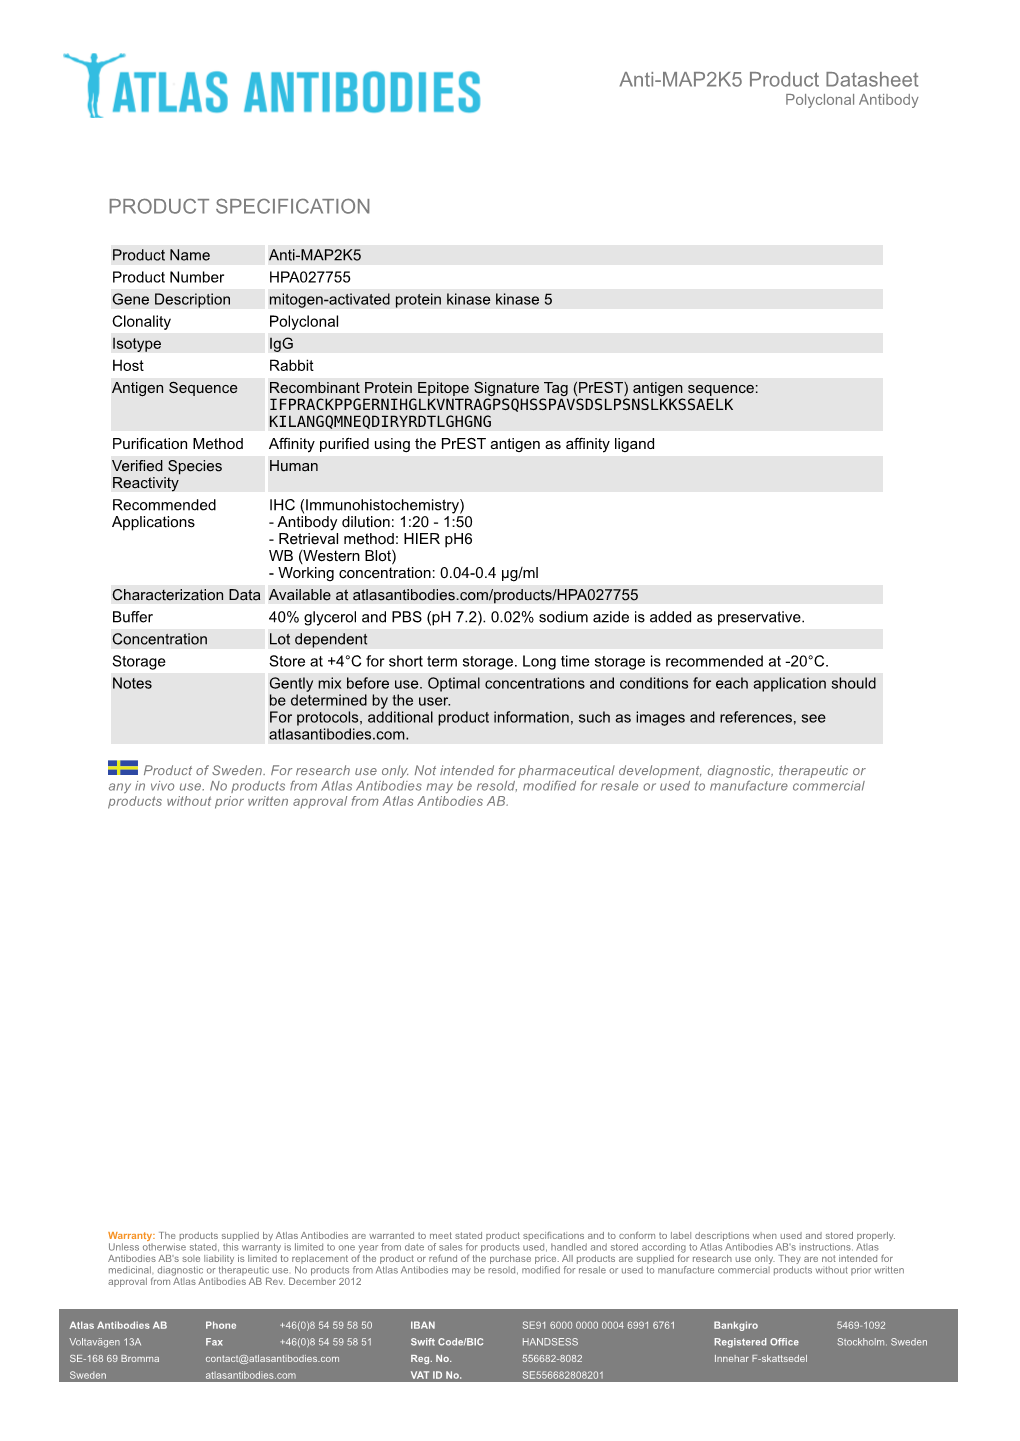 PRODUCT SPECIFICATION Anti-MAP2K5